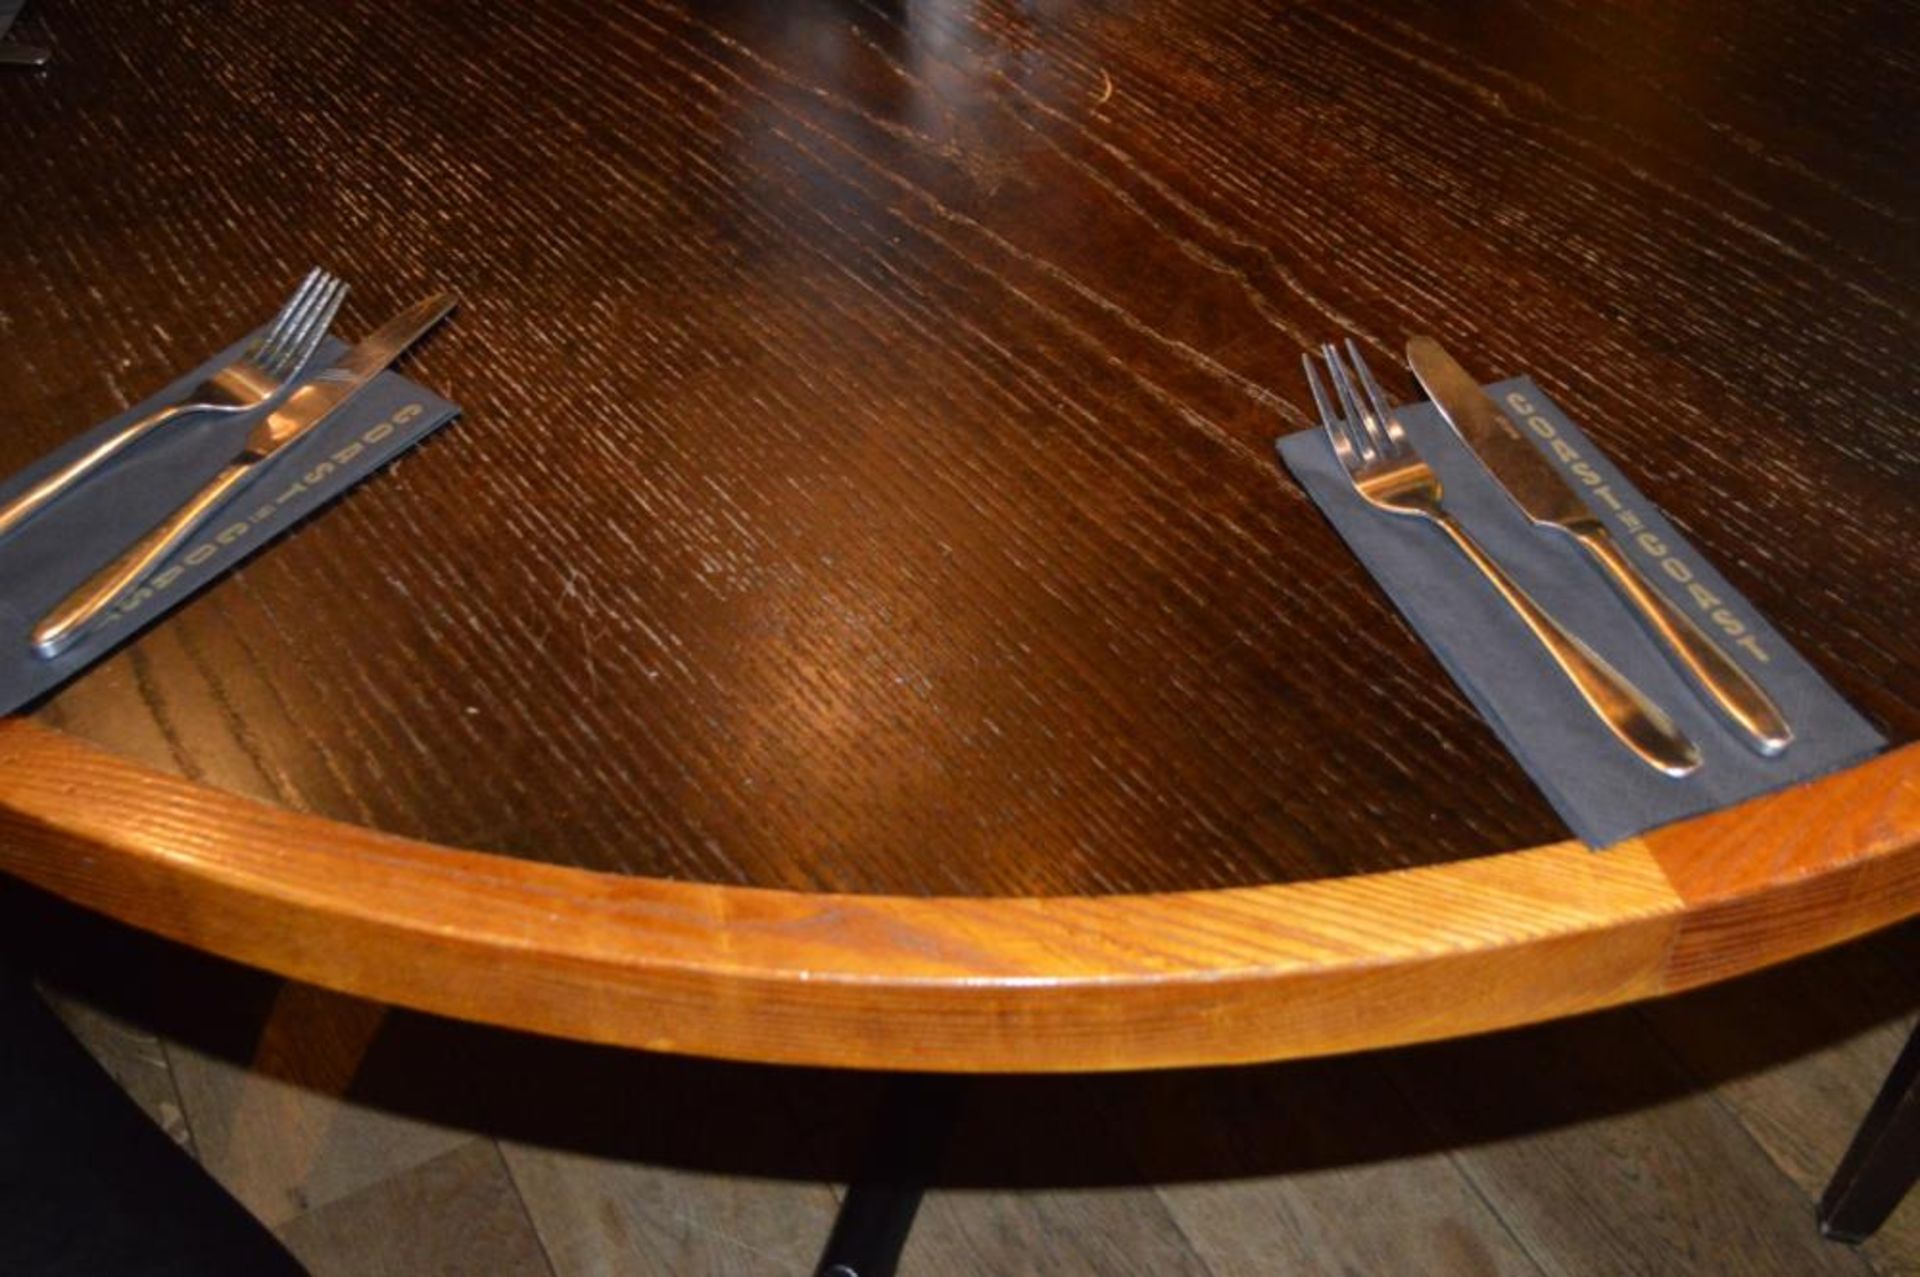 4 x Restaurant Dining Tables With Cast Iron Bases - Two Tone Wooden Finish With Shaped Edges - H76 x - Image 4 of 5